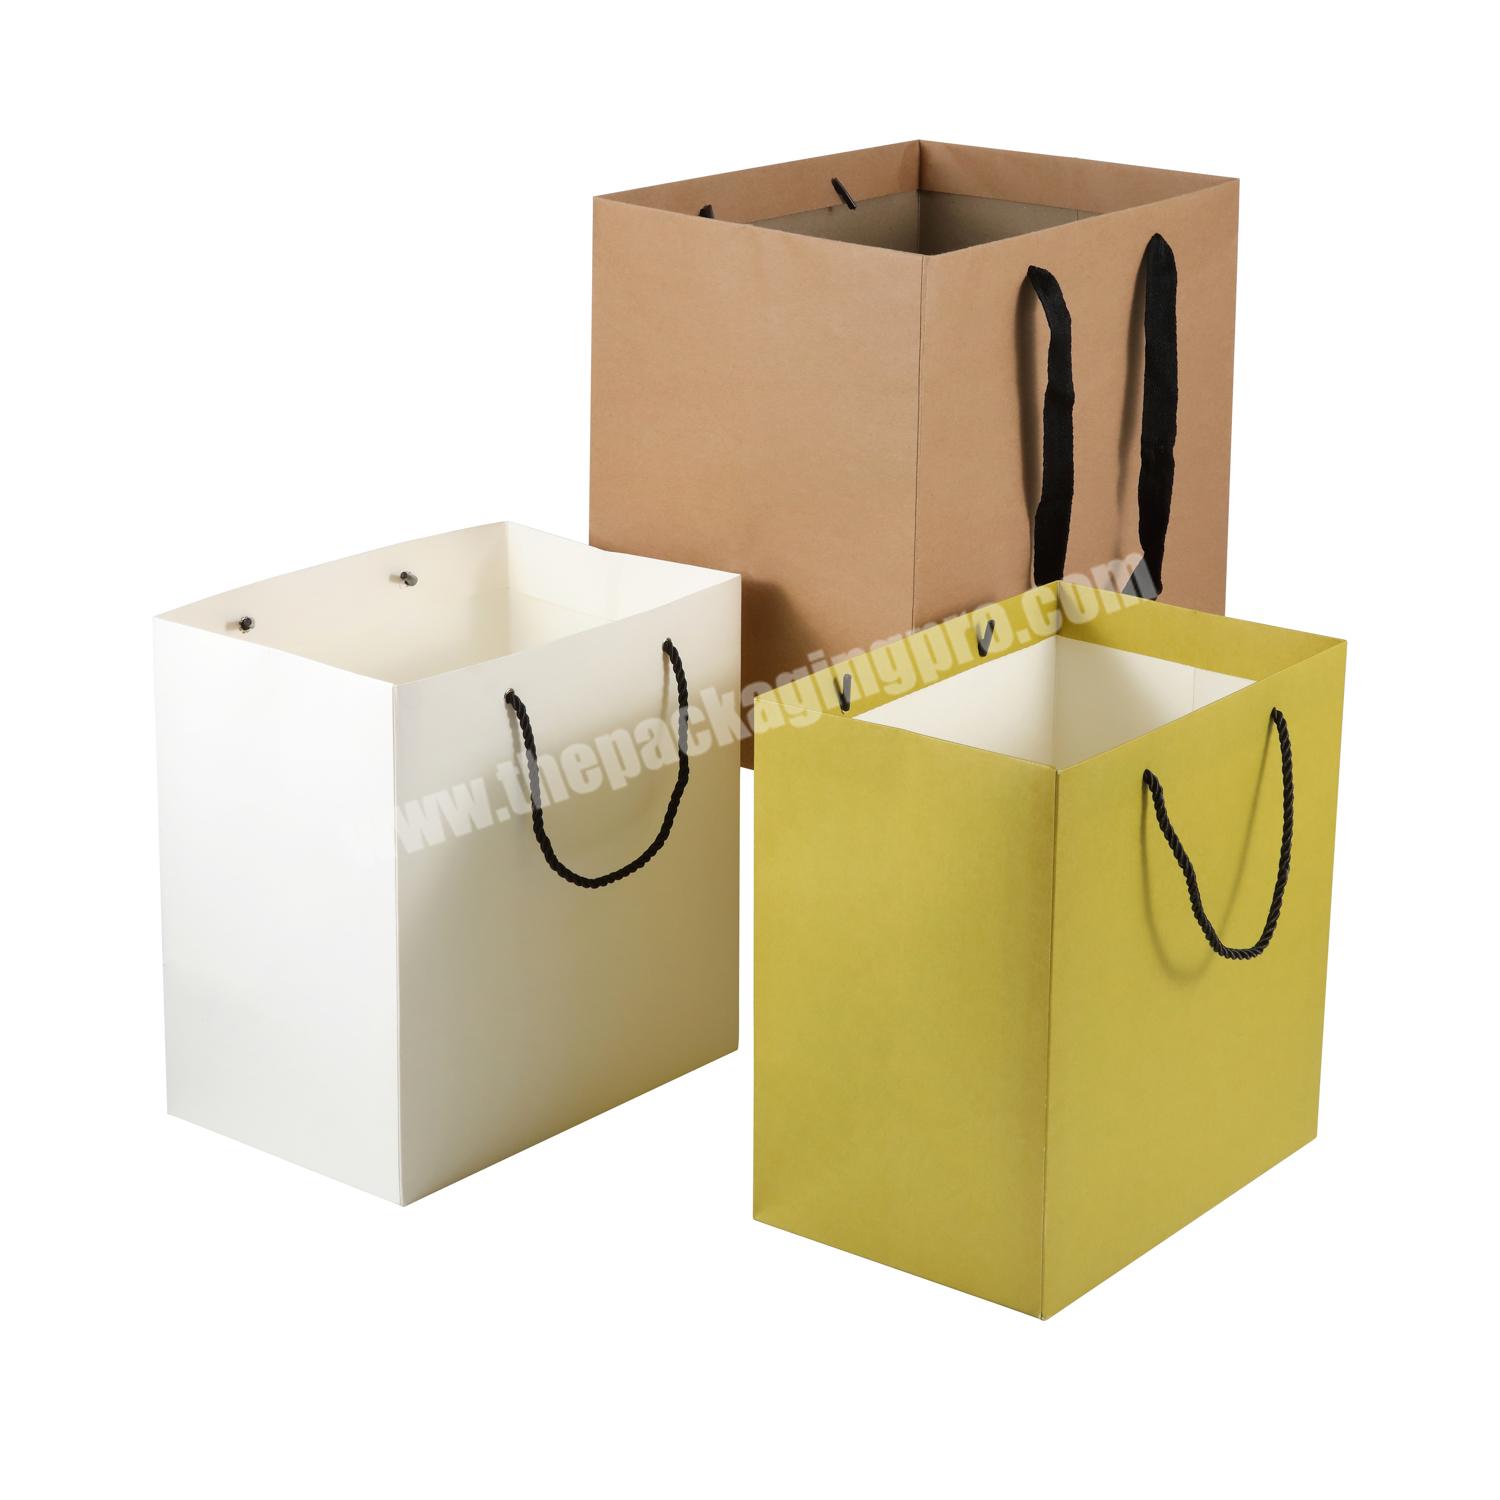 CONVRT Solid Party Bag, Imported Kraft Paper Bag, Natural Brown, Size 12 x  5.5 x 8.5 inches, Pastry, Cake, Confectionery Box Carry Bag, Food delivery,  Shopping, Apparels Bag Pack of 10 Grocery